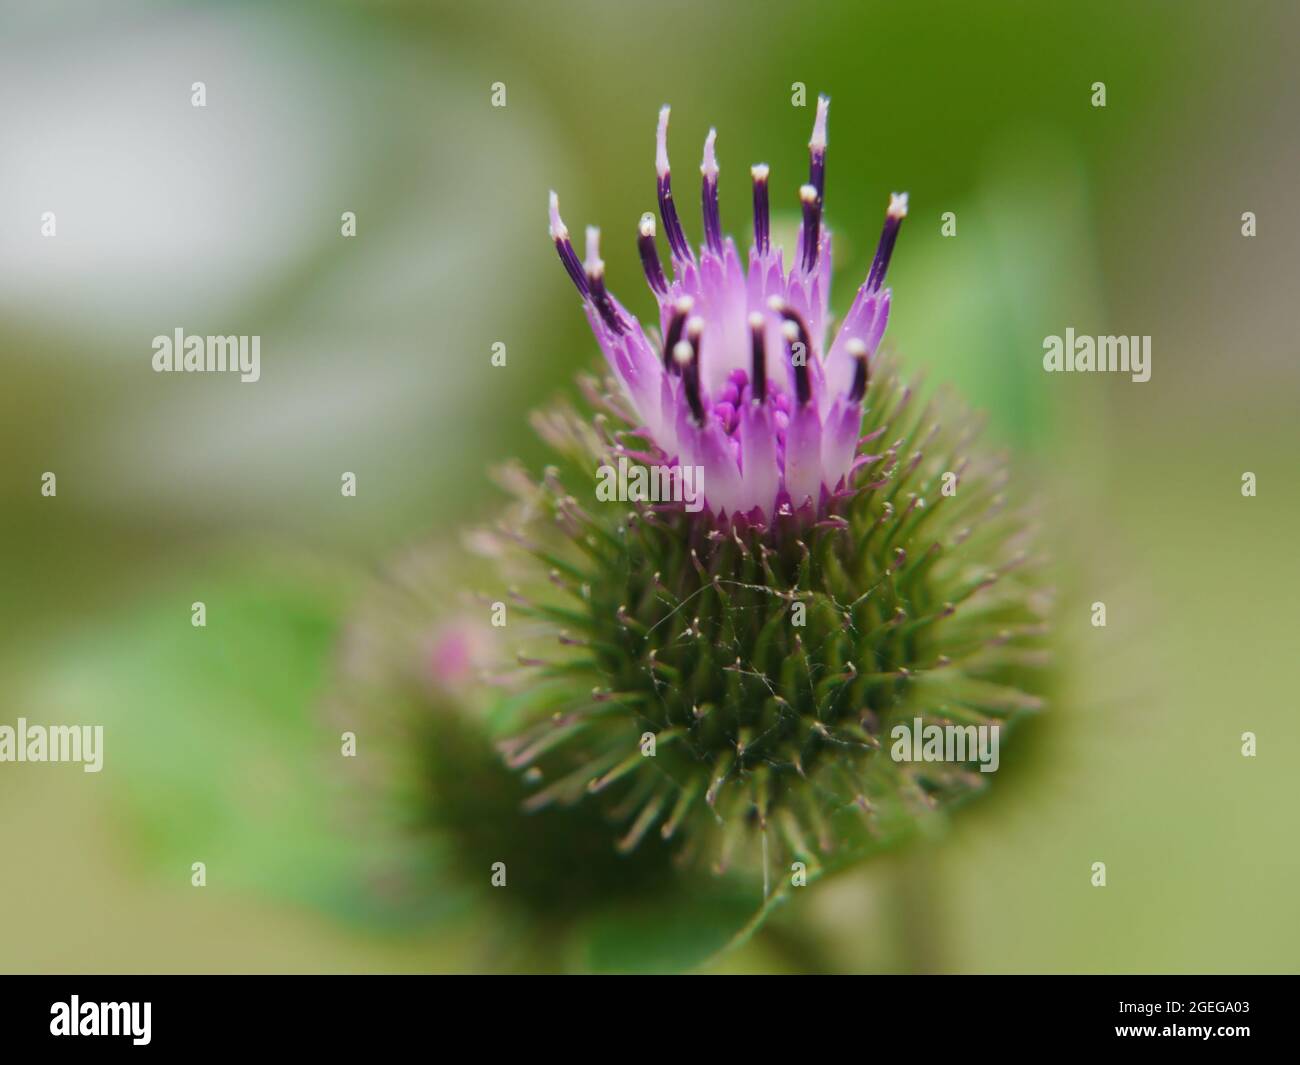 Close-up on the pink and purple flower on a lesser burdock plant Stock Photo